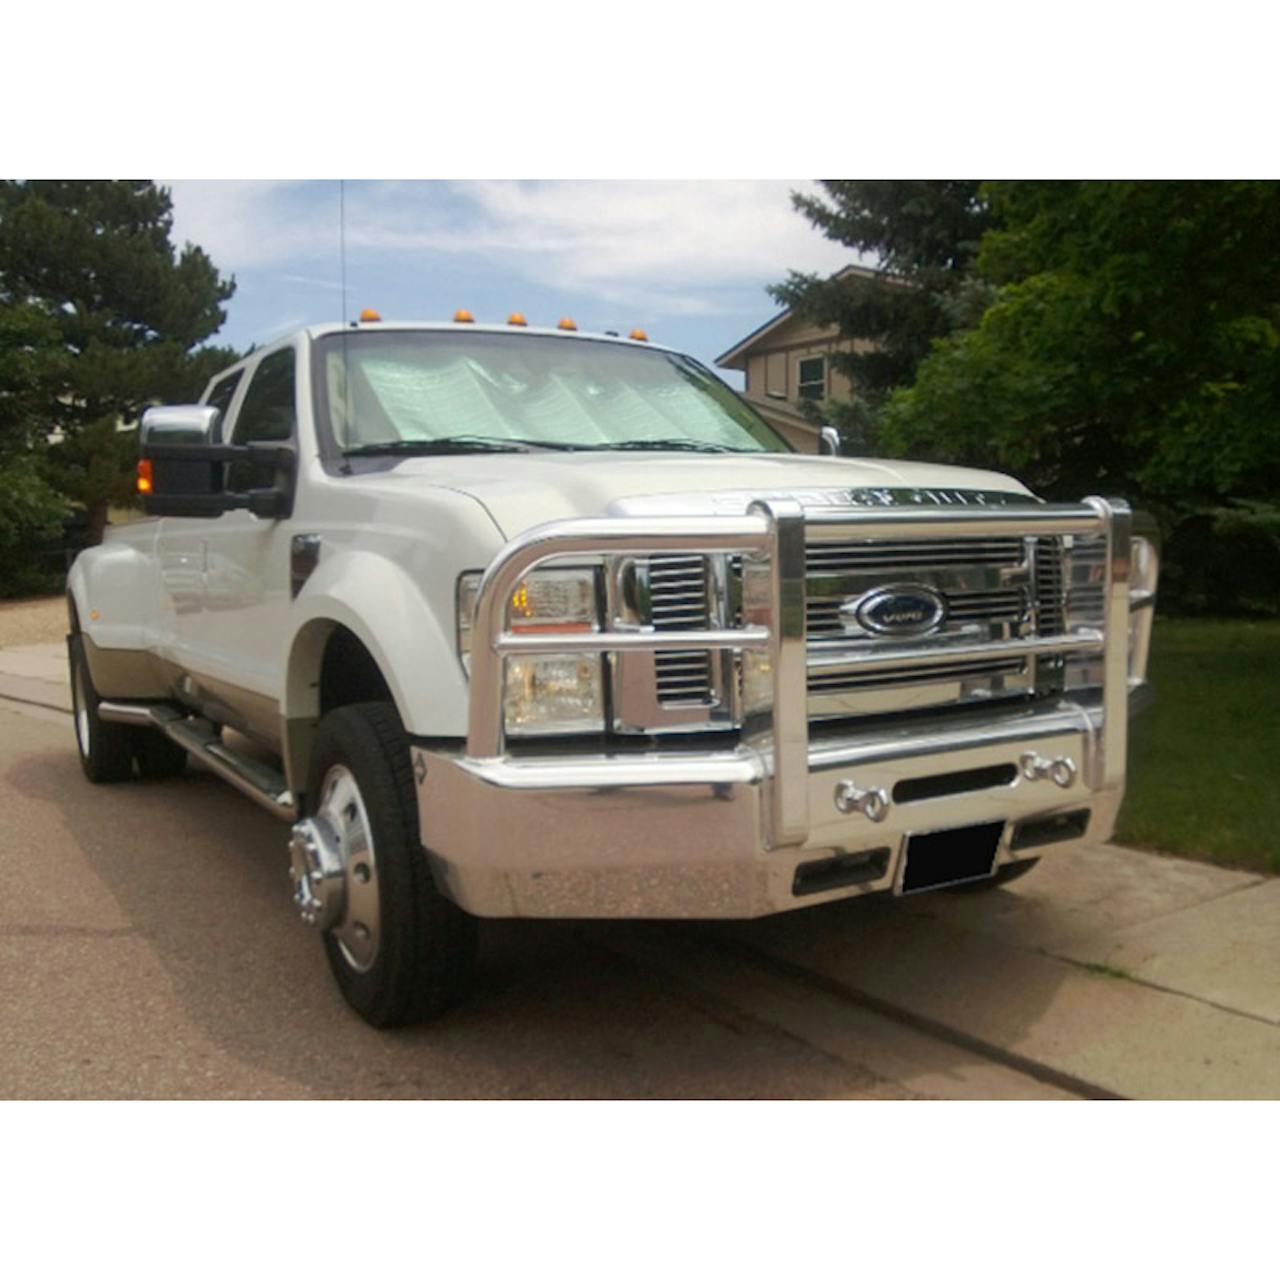 Home - HERD Grille Guards, Cab Racks & Truck Accessories